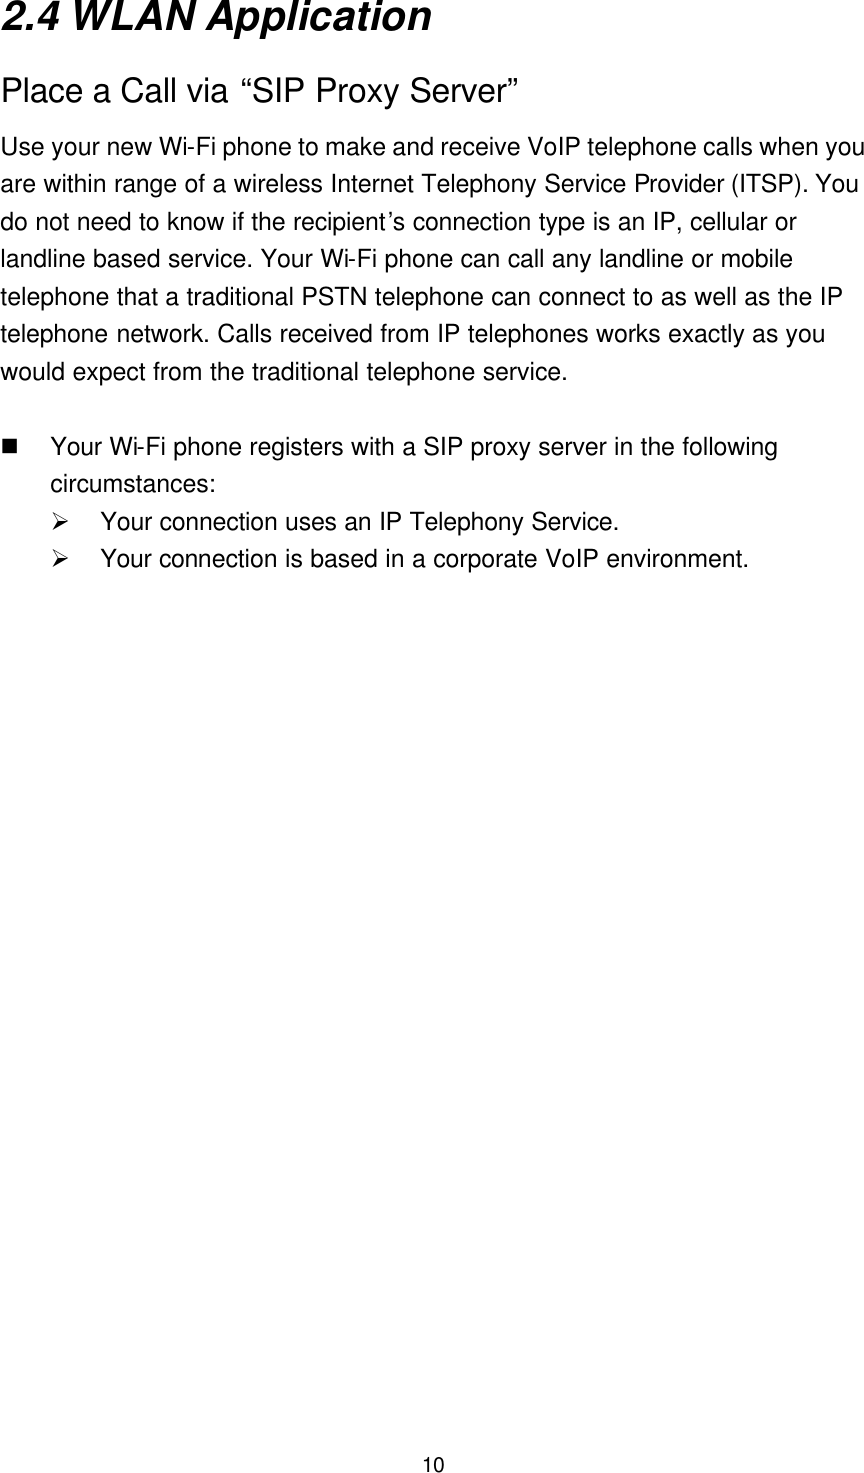  10 2.4 WLAN Application Place a Call via “SIP Proxy Server” Use your new Wi-Fi phone to make and receive VoIP telephone calls when you are within range of a wireless Internet Telephony Service Provider (ITSP). You do not need to know if the recipient’s connection type is an IP, cellular or landline based service. Your Wi-Fi phone can call any landline or mobile telephone that a traditional PSTN telephone can connect to as well as the IP telephone network. Calls received from IP telephones works exactly as you would expect from the traditional telephone service.  n Your Wi-Fi phone registers with a SIP proxy server in the following circumstances: Ø Your connection uses an IP Telephony Service. Ø Your connection is based in a corporate VoIP environment.  